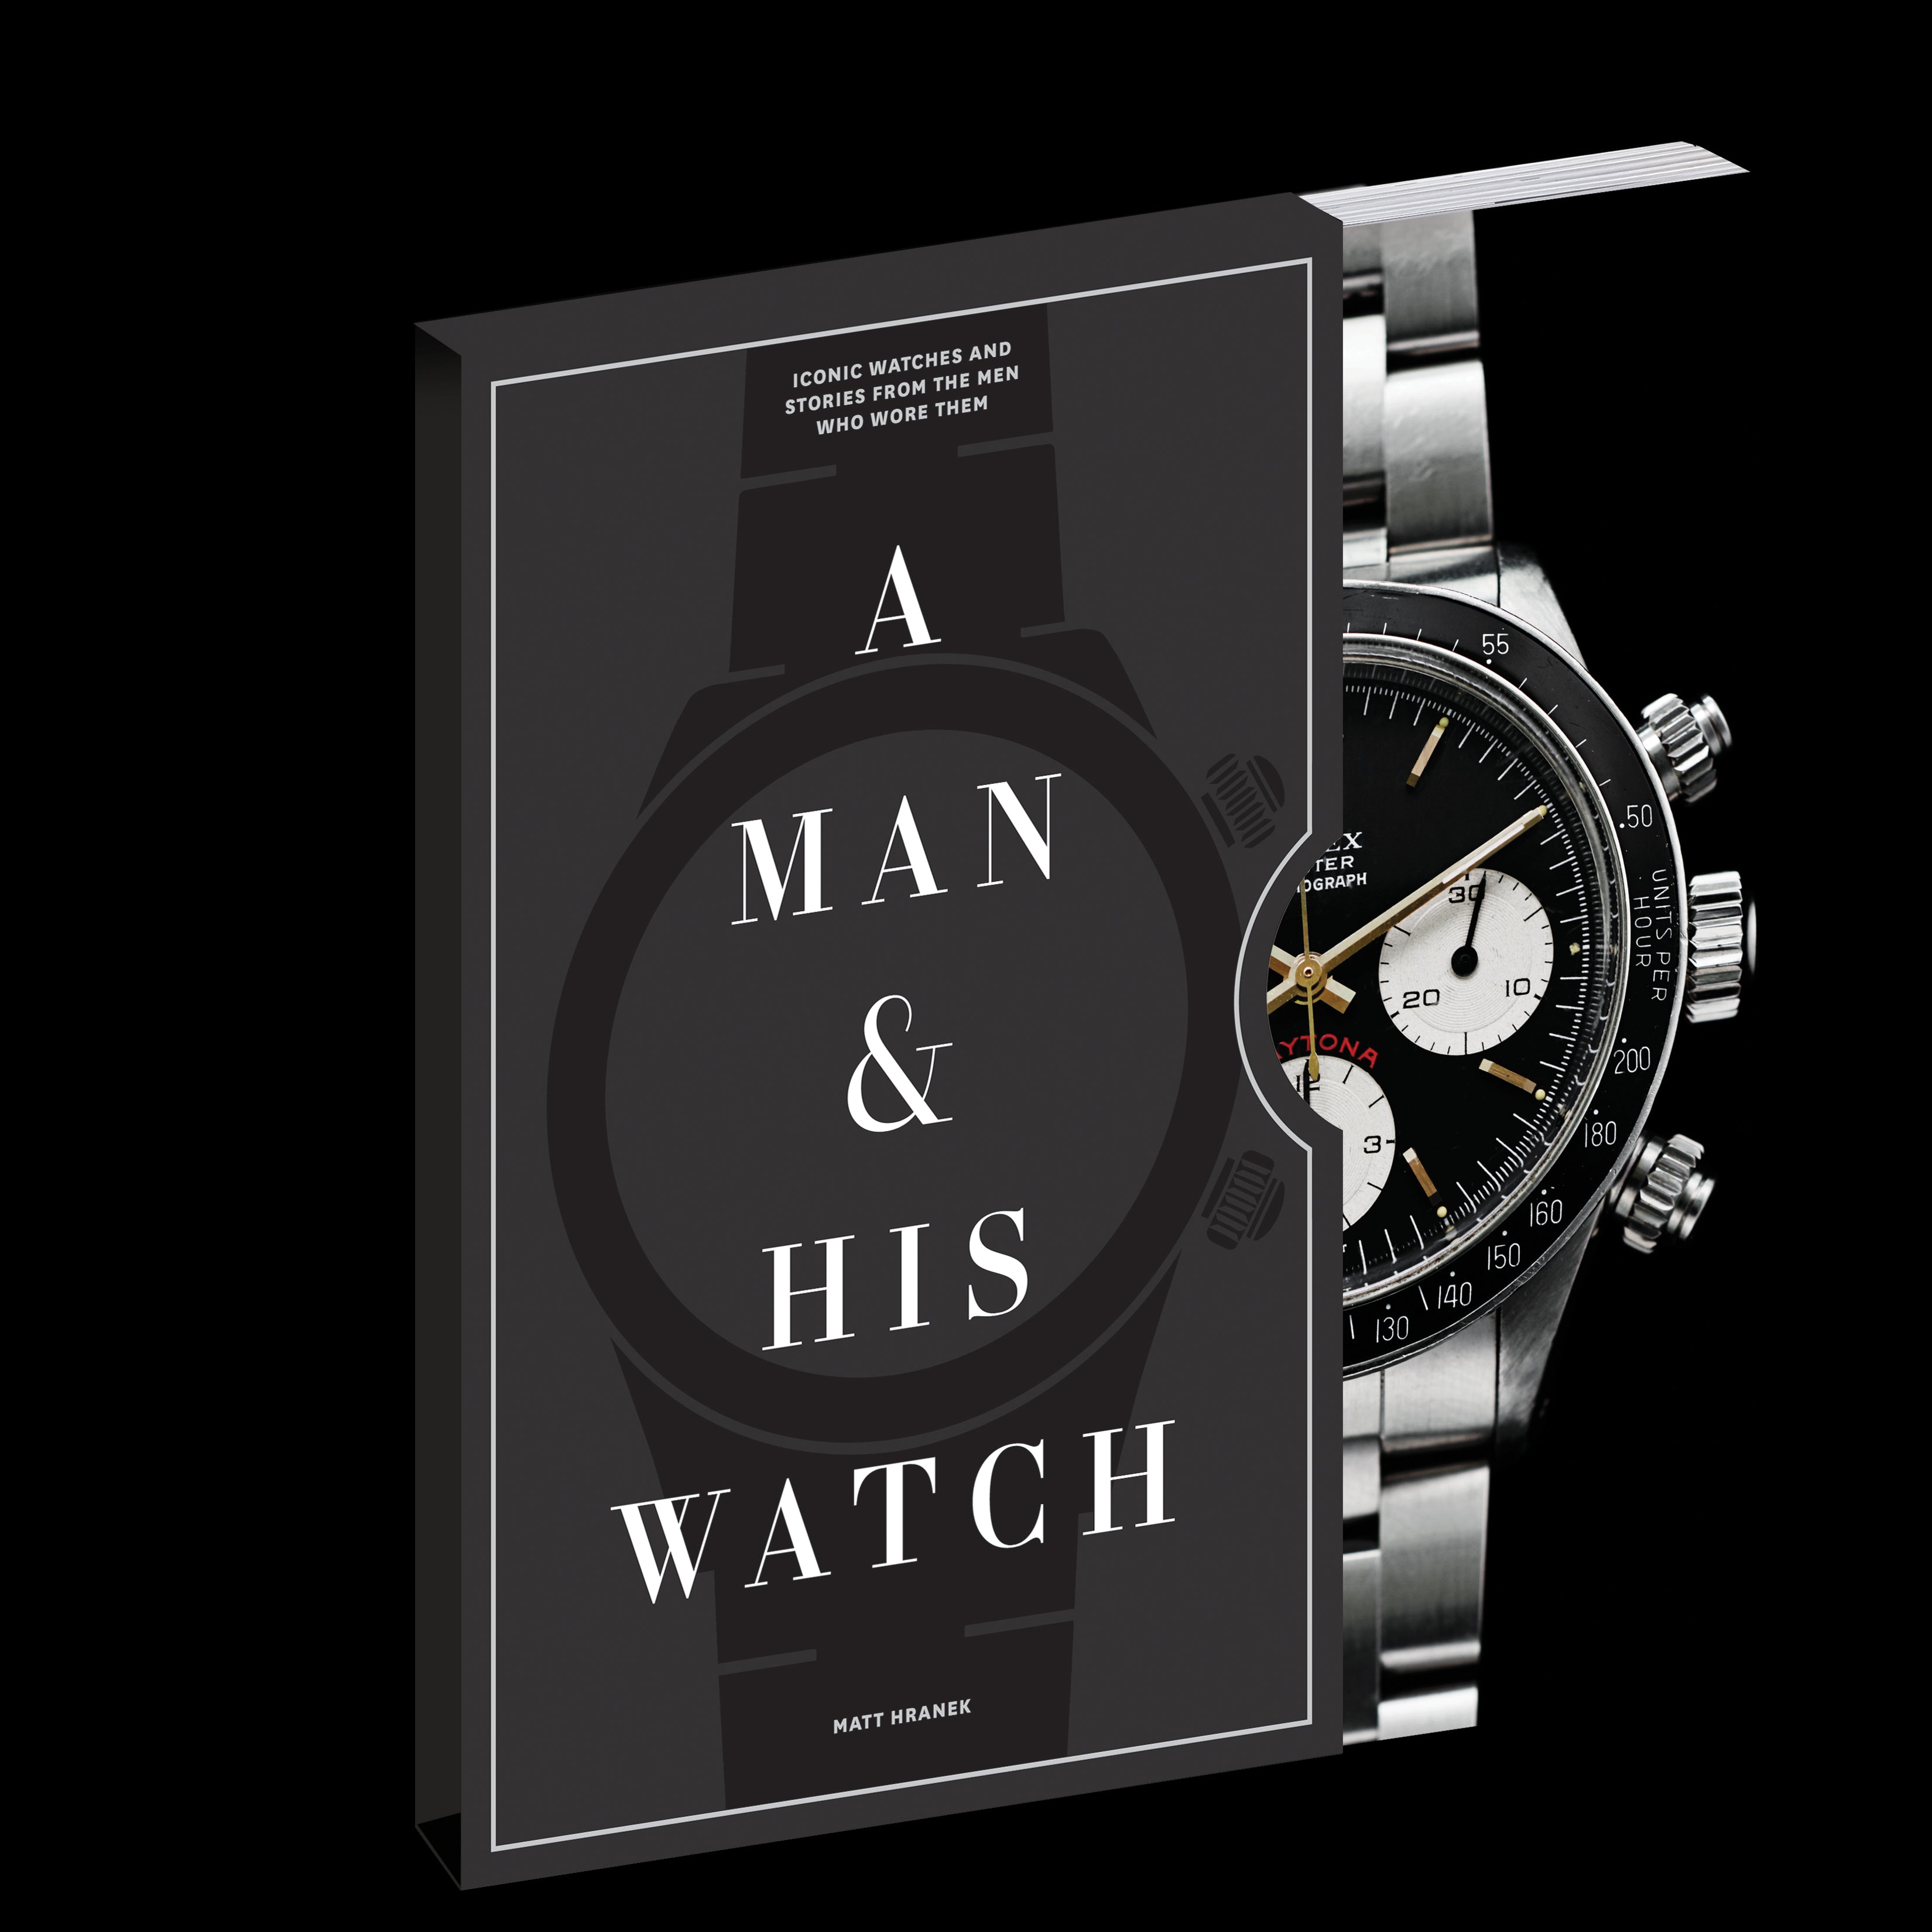 A Man & His Watch : Iconic Watches & Stories from the Men Who Wore Them